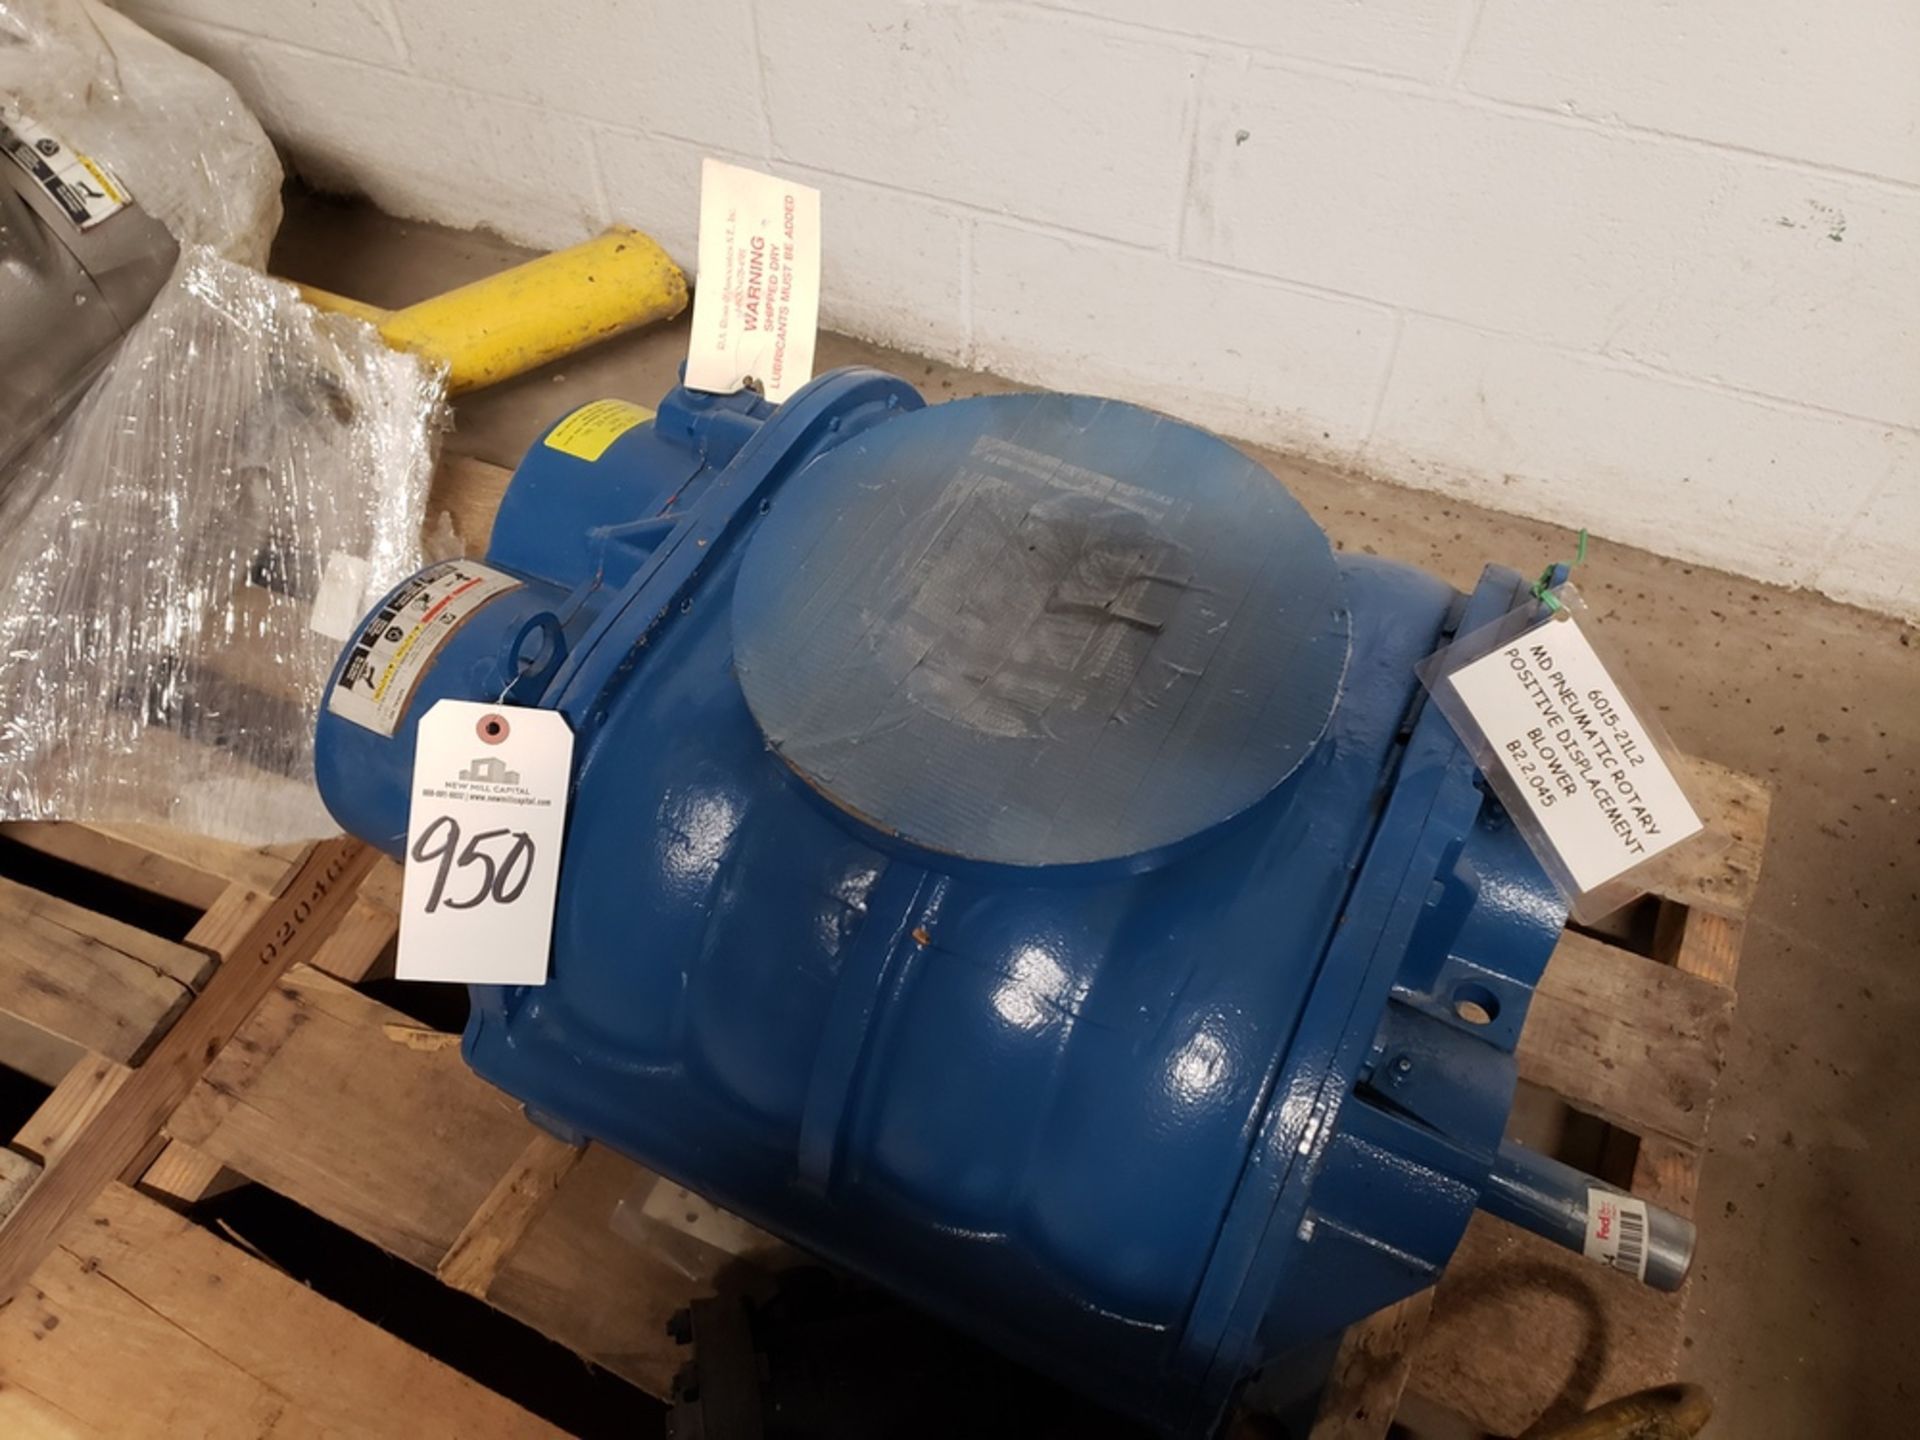 Tuthill Rotary Positive Displacement Blower, M# 6015-21L2 - Subject to Bulk Bid Lot | Rig Fee: $100